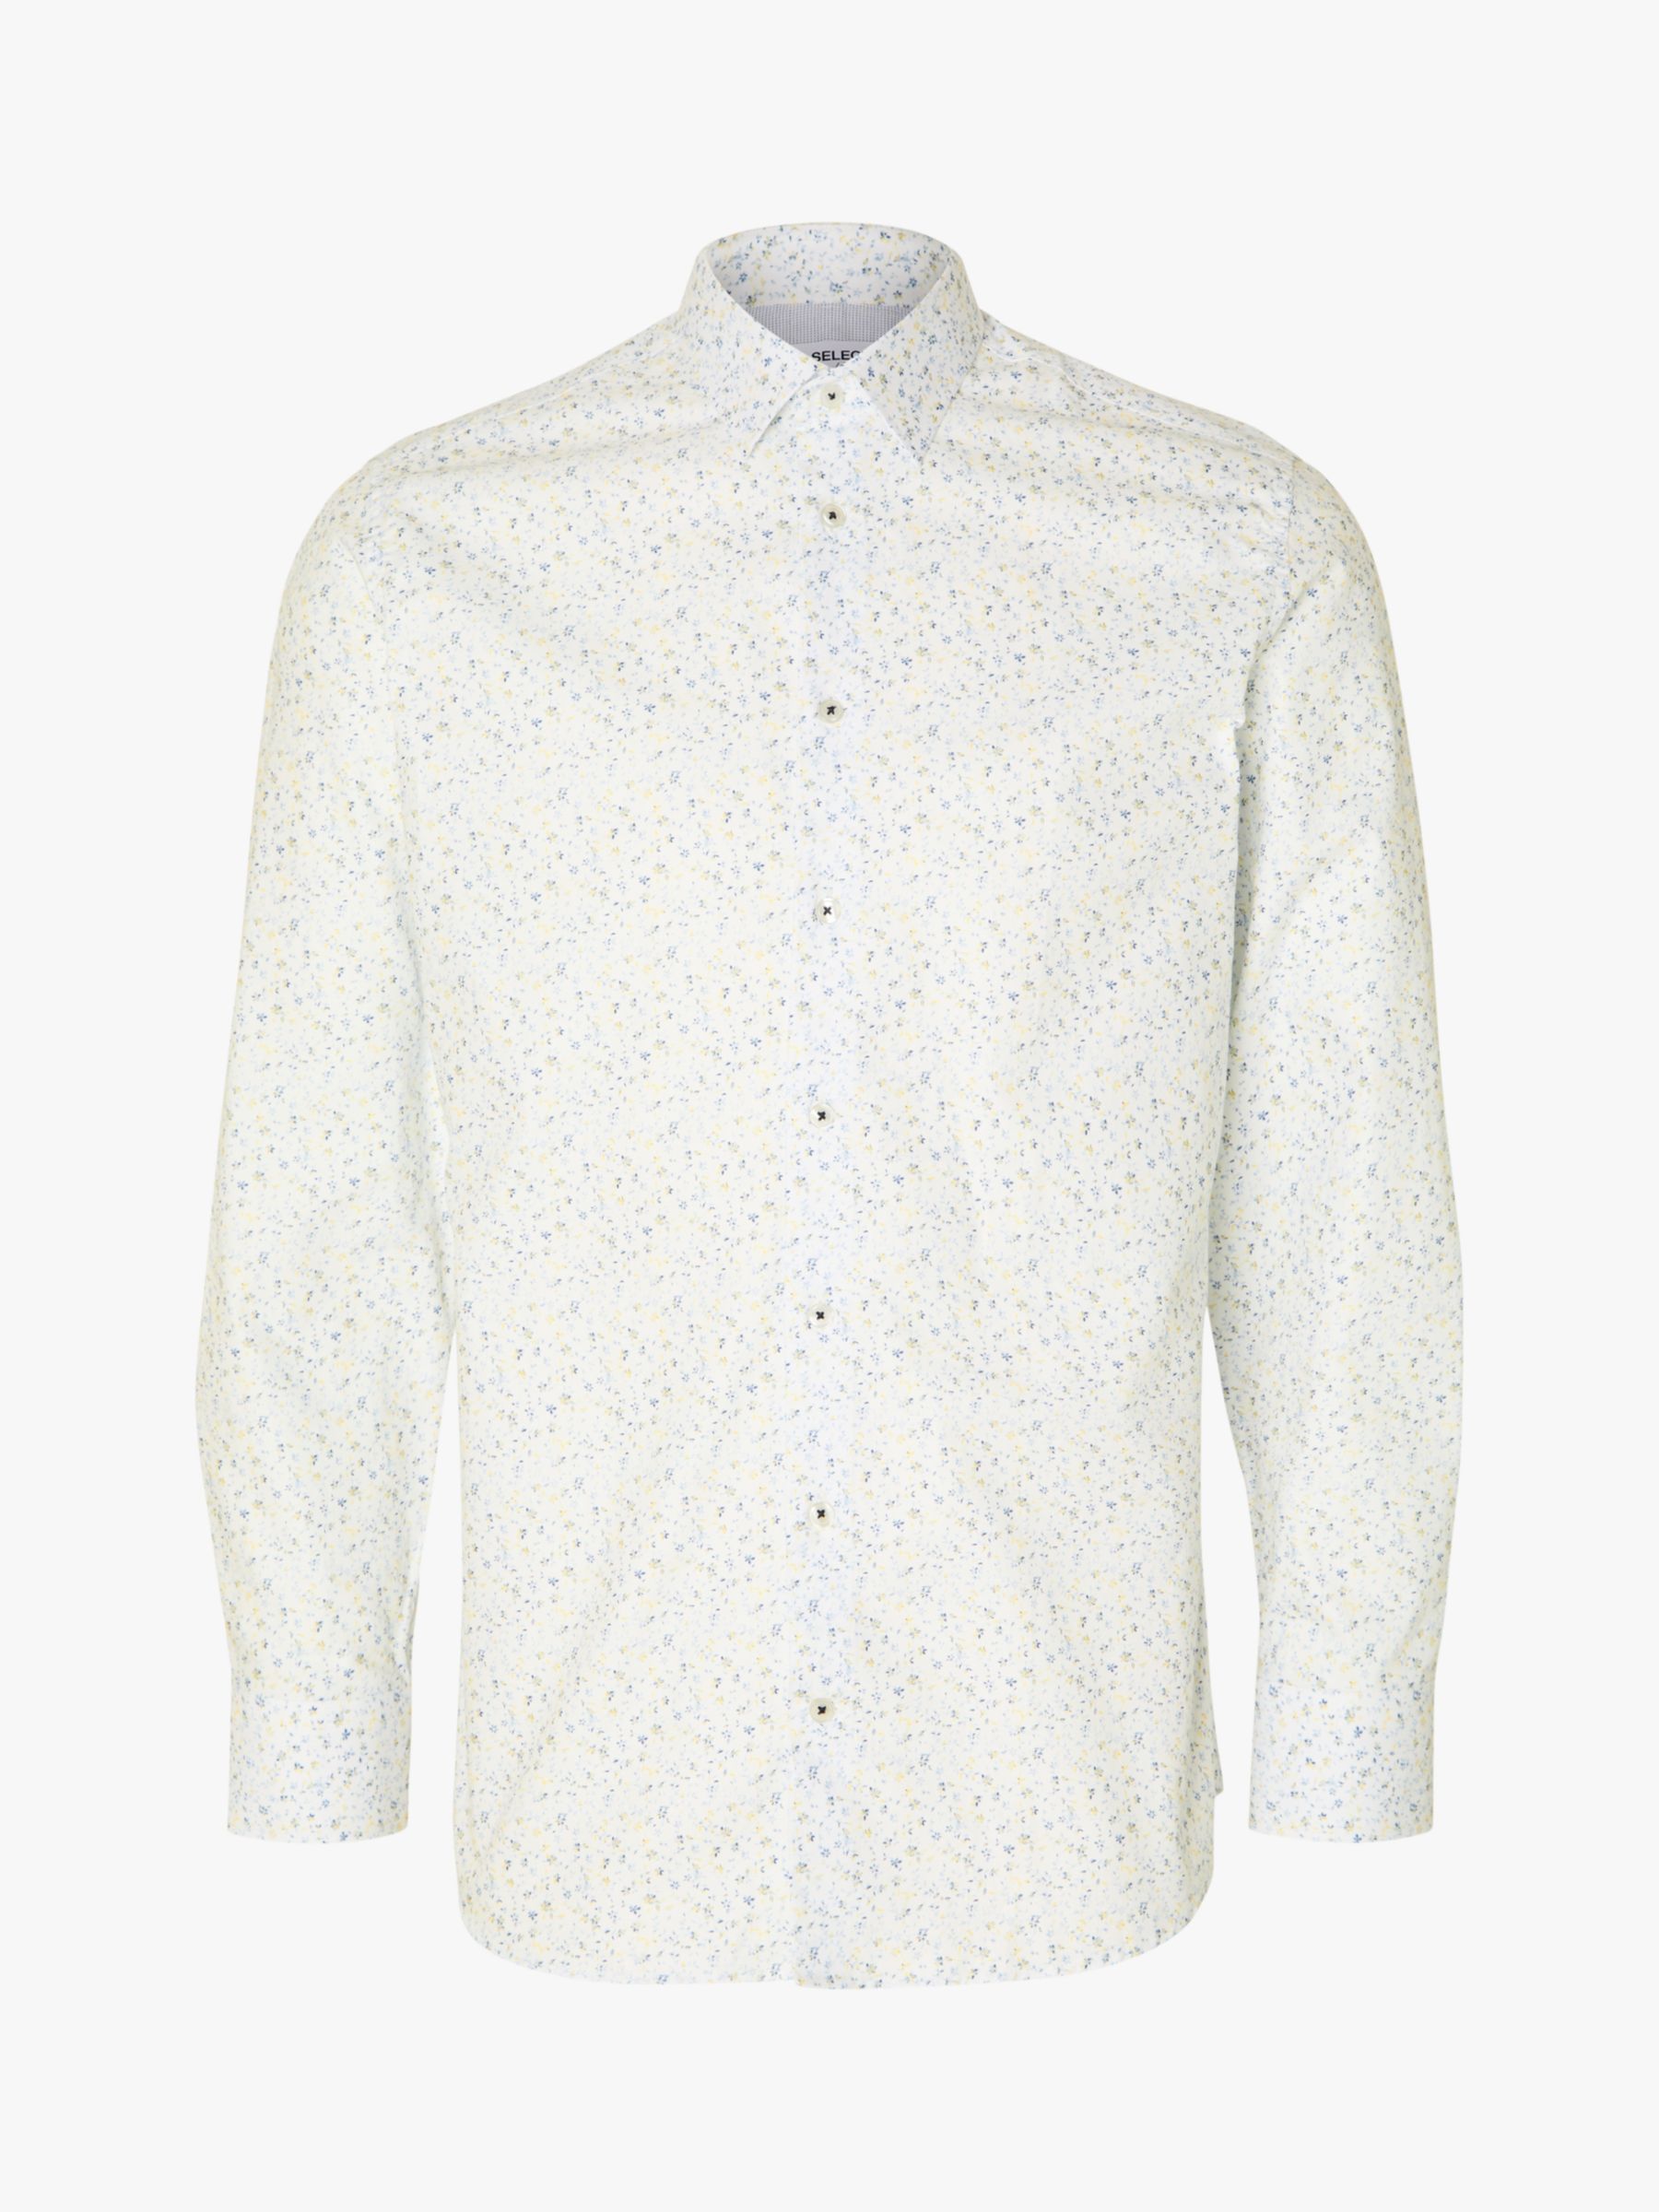 SELECTED HOMME Slim Fit Long Sleeve Floral Shirt, White, S